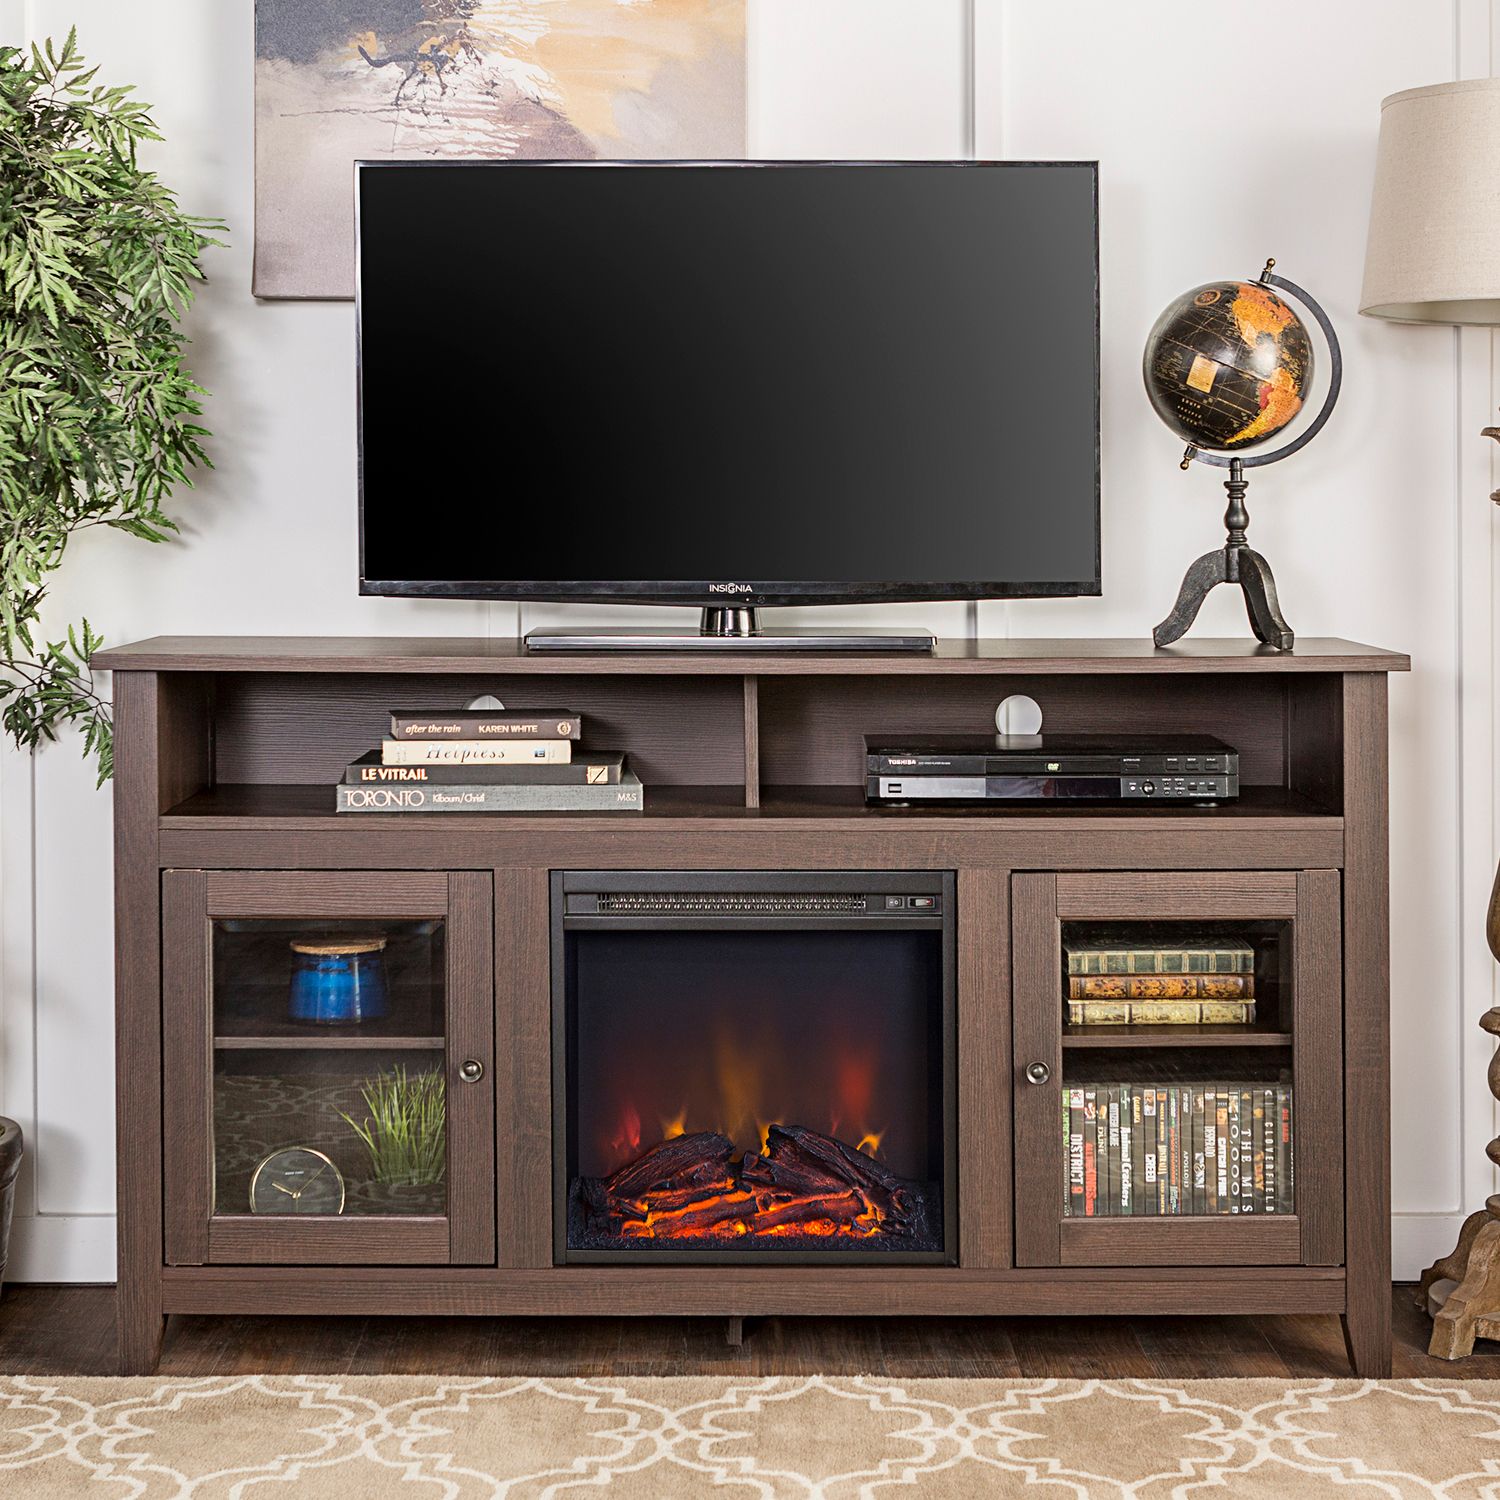 Highboy Wood Fireplace Tv Stand – Pier1 Within Wood Highboy Fireplace Tv Stands (Gallery 4 of 20)